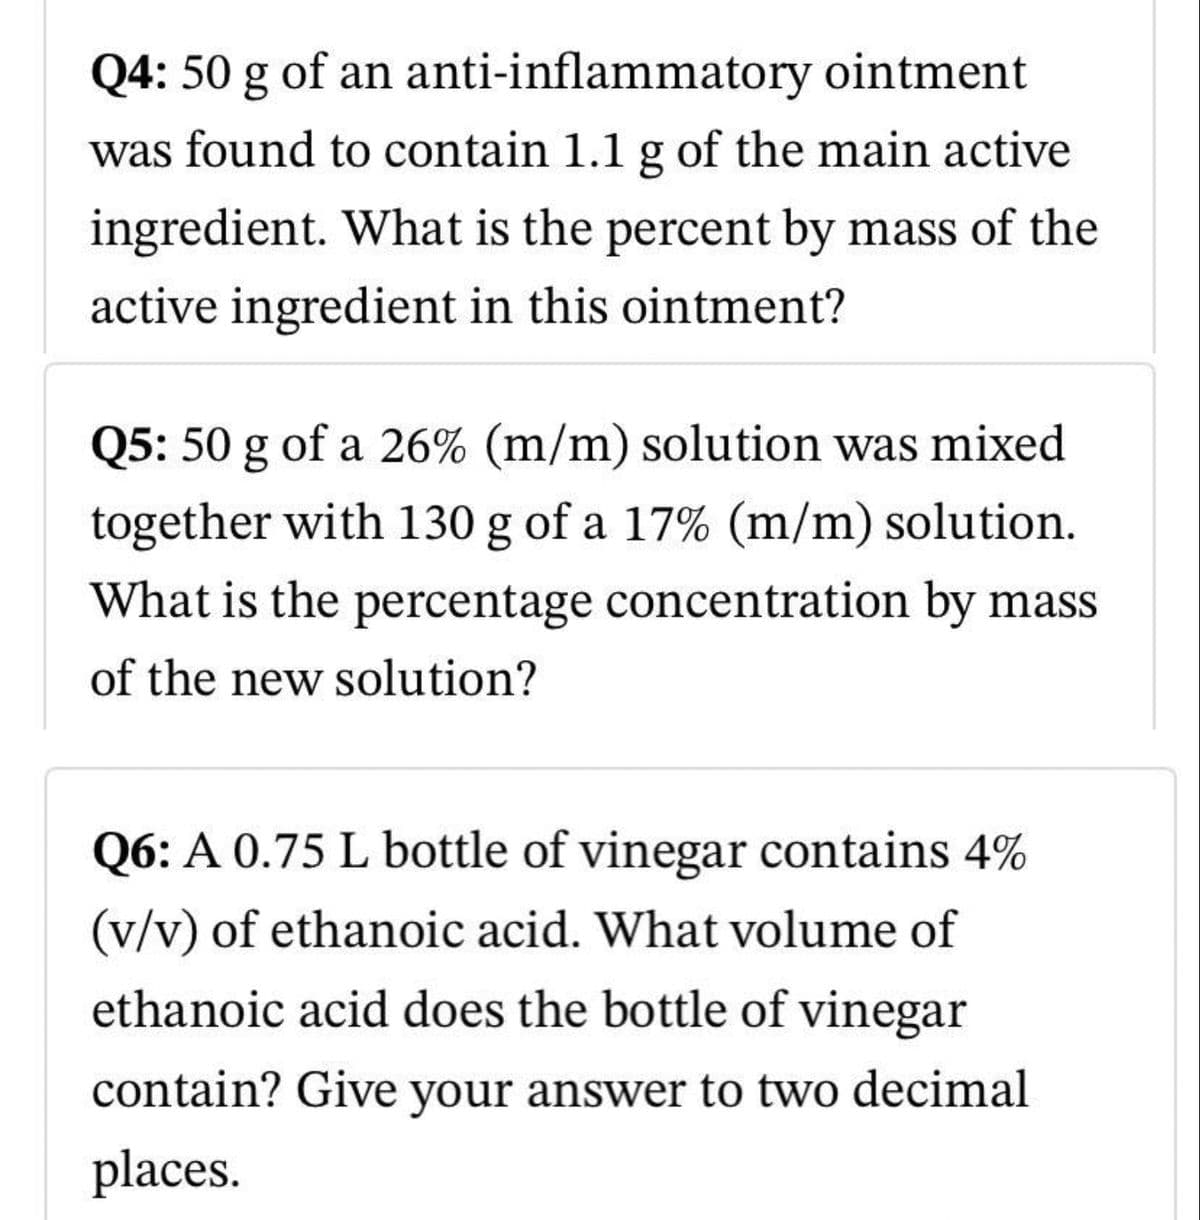 Q4: 50 g of an
anti-inflammatory
ointment
was found to contain 1.1 g of the main active
ingredient. What is the percent by mass of the
active ingredient in this ointment?
Q5: 50 g of a 26% (m/m) solution was mixed
together with 130 g of a 17% (m/m) solution.
What is the percentage concentration by mass
of the new solution?
Q6: A 0.75 L bottle of vinegar contains 4%
(v/v) of ethanoic acid. What volume of
ethanoic acid does the bottle of vinegar
contain? Give your answer to two decimal
places.